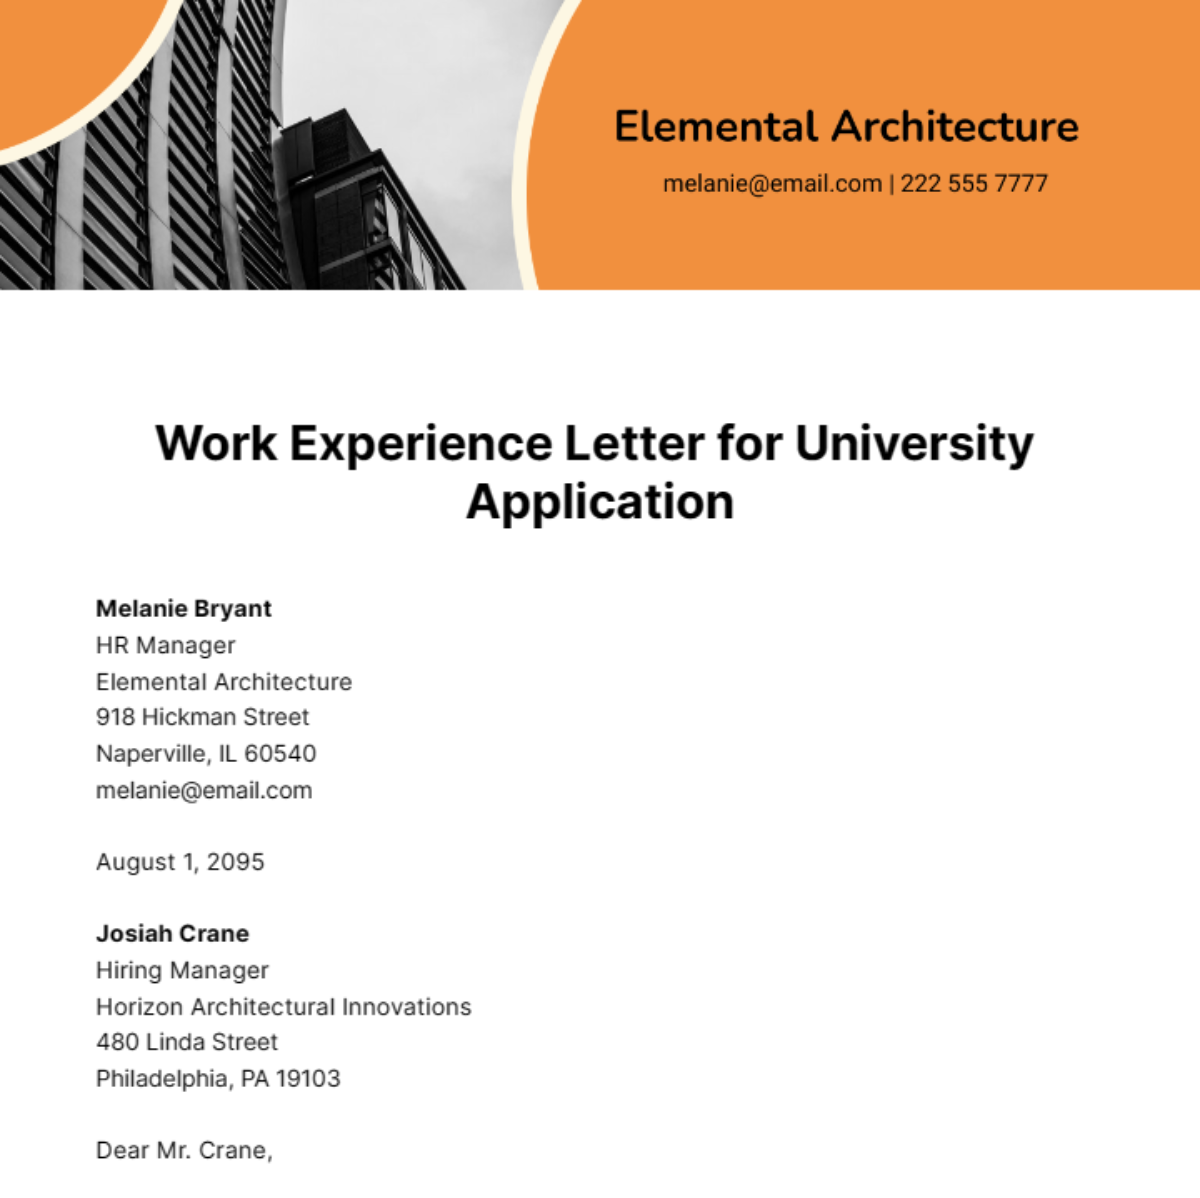 Work Experience Letter for University Application Template